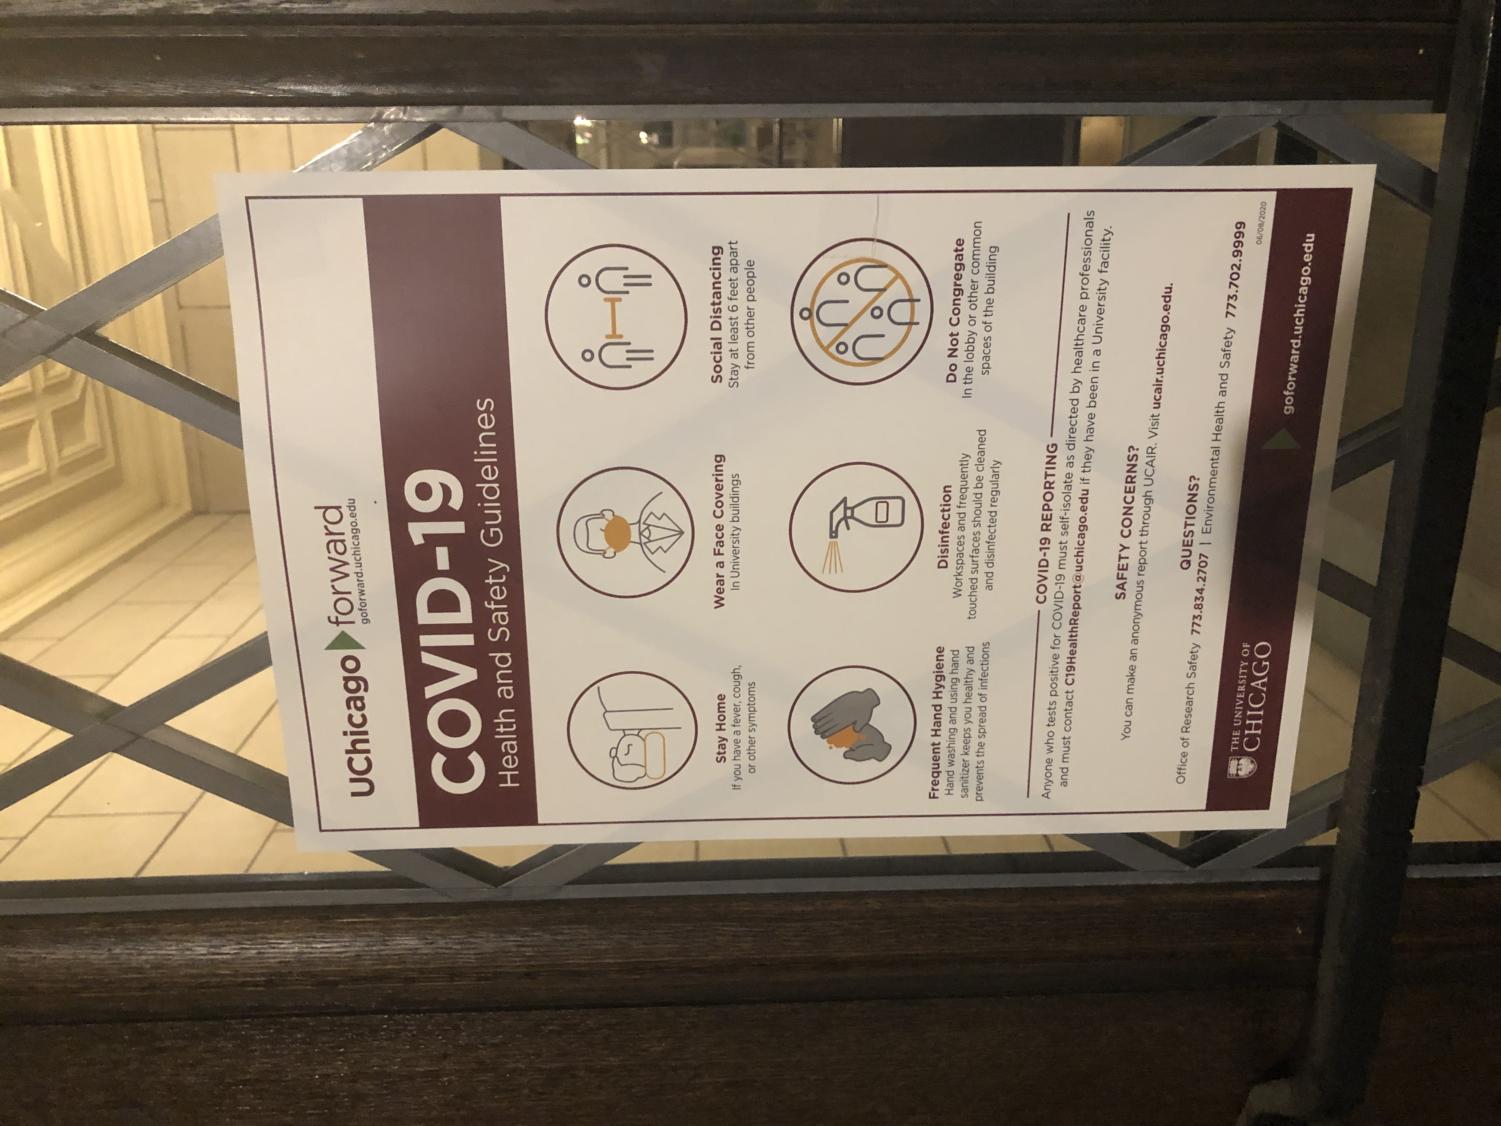 A University-produced flyer on the door of the Social Science Research Building shares “COVID-19 Health and Safety Guidelines,” including social distancing.